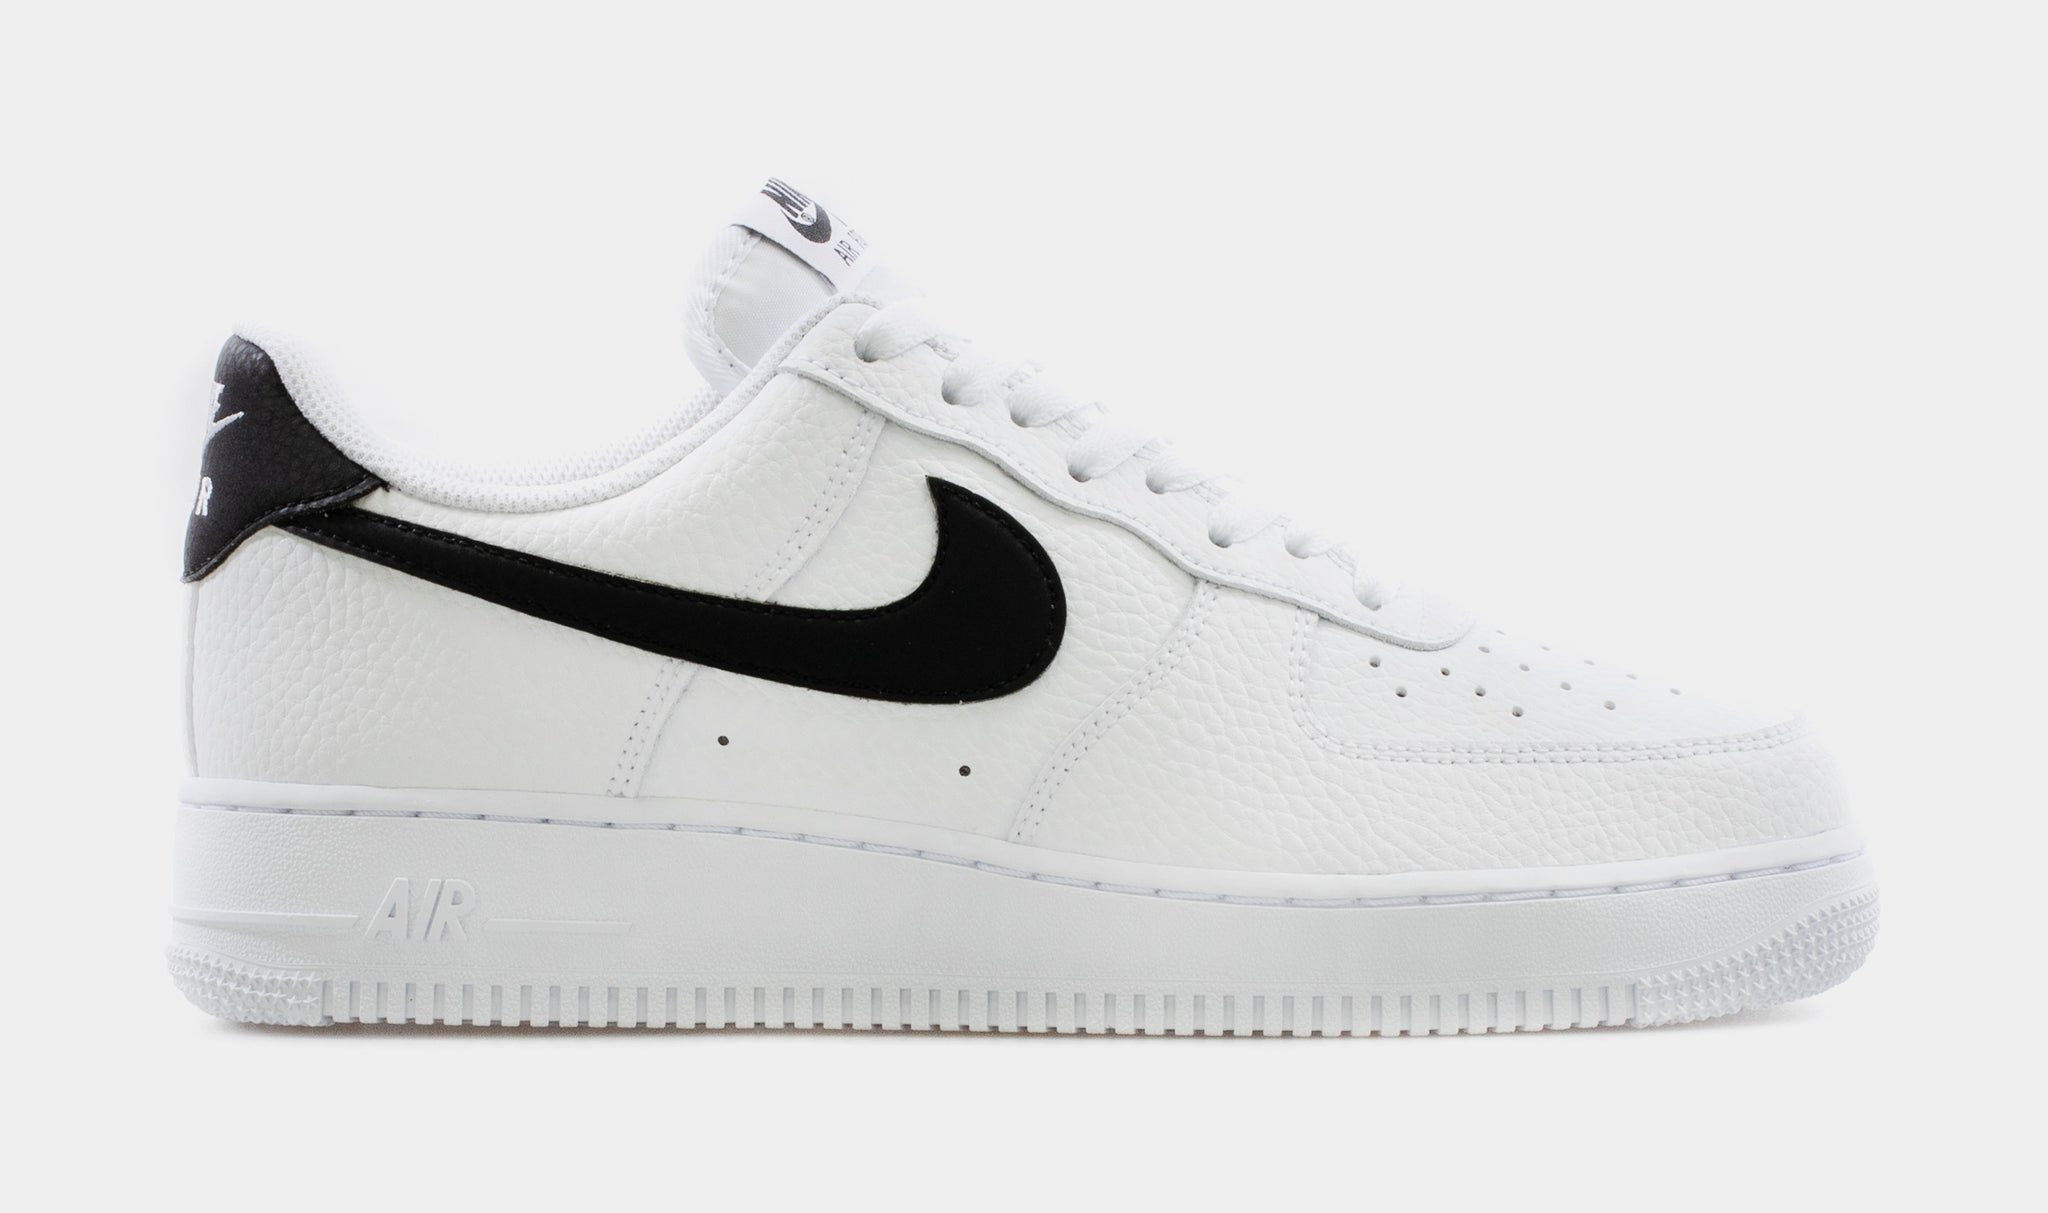 Nike Air Force 1 07 Mens Lifestyle Shoes White CT2302-100 – Shoe